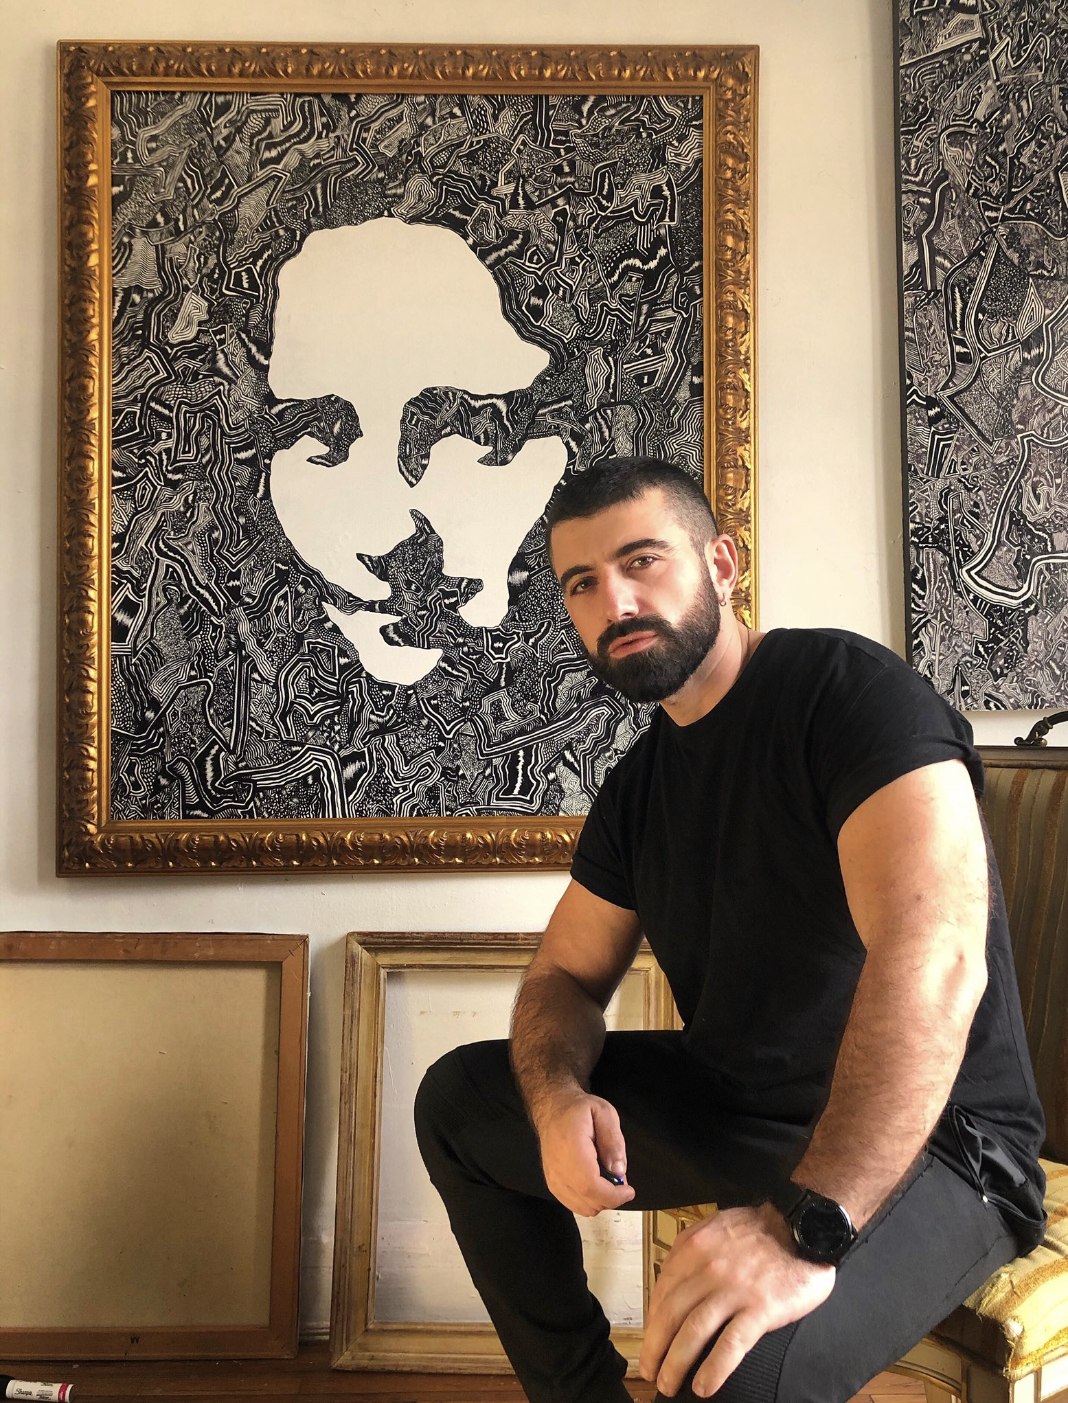 David in a black t-shirt in front of one of his paintings, a black and white rendition of the Mona Lisa